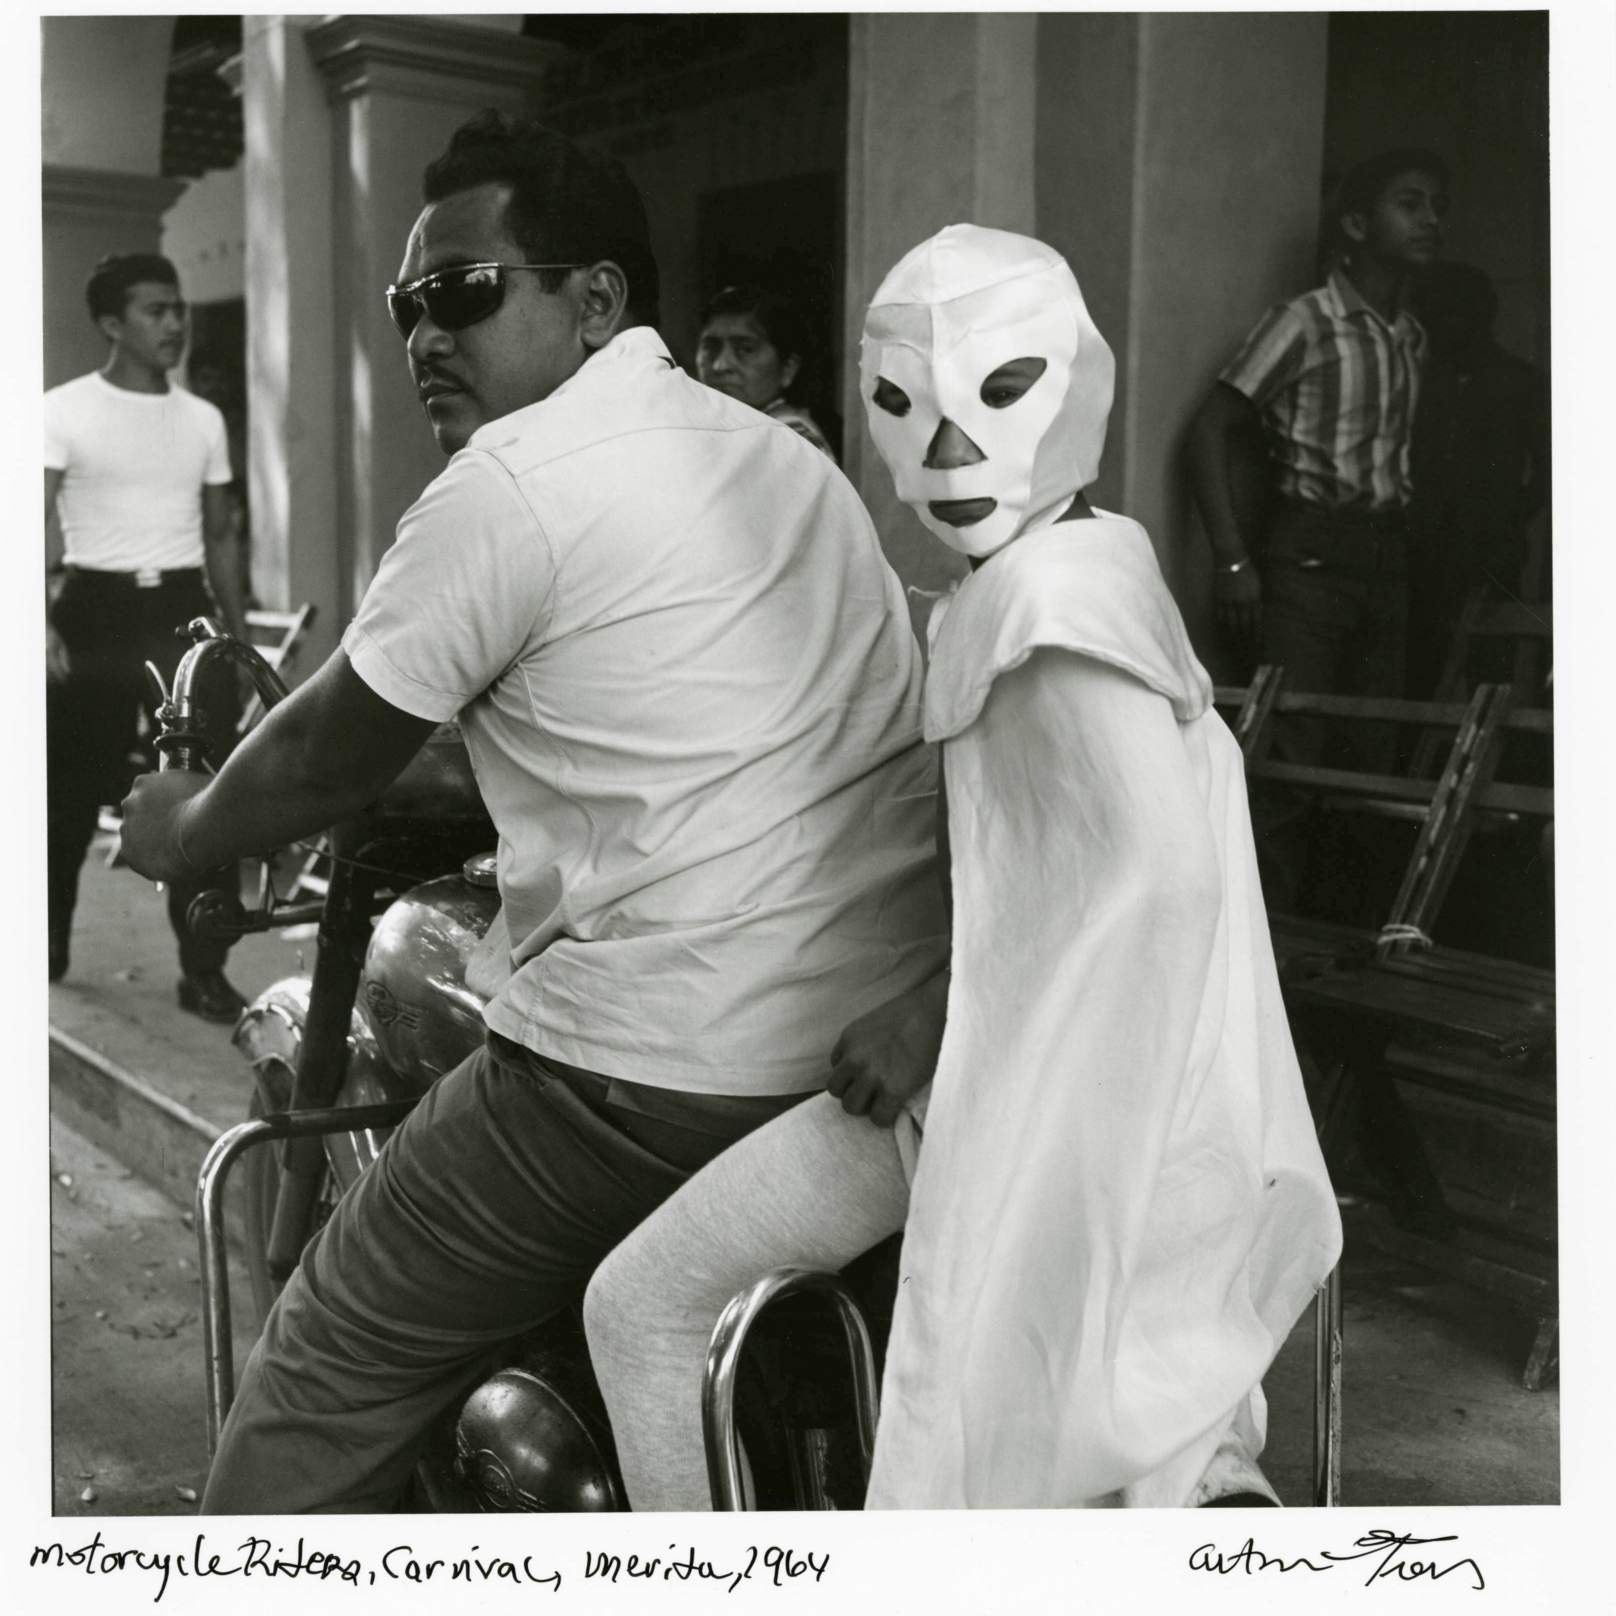 Photo by Tress called Motorcyle Riders, Merida 1964